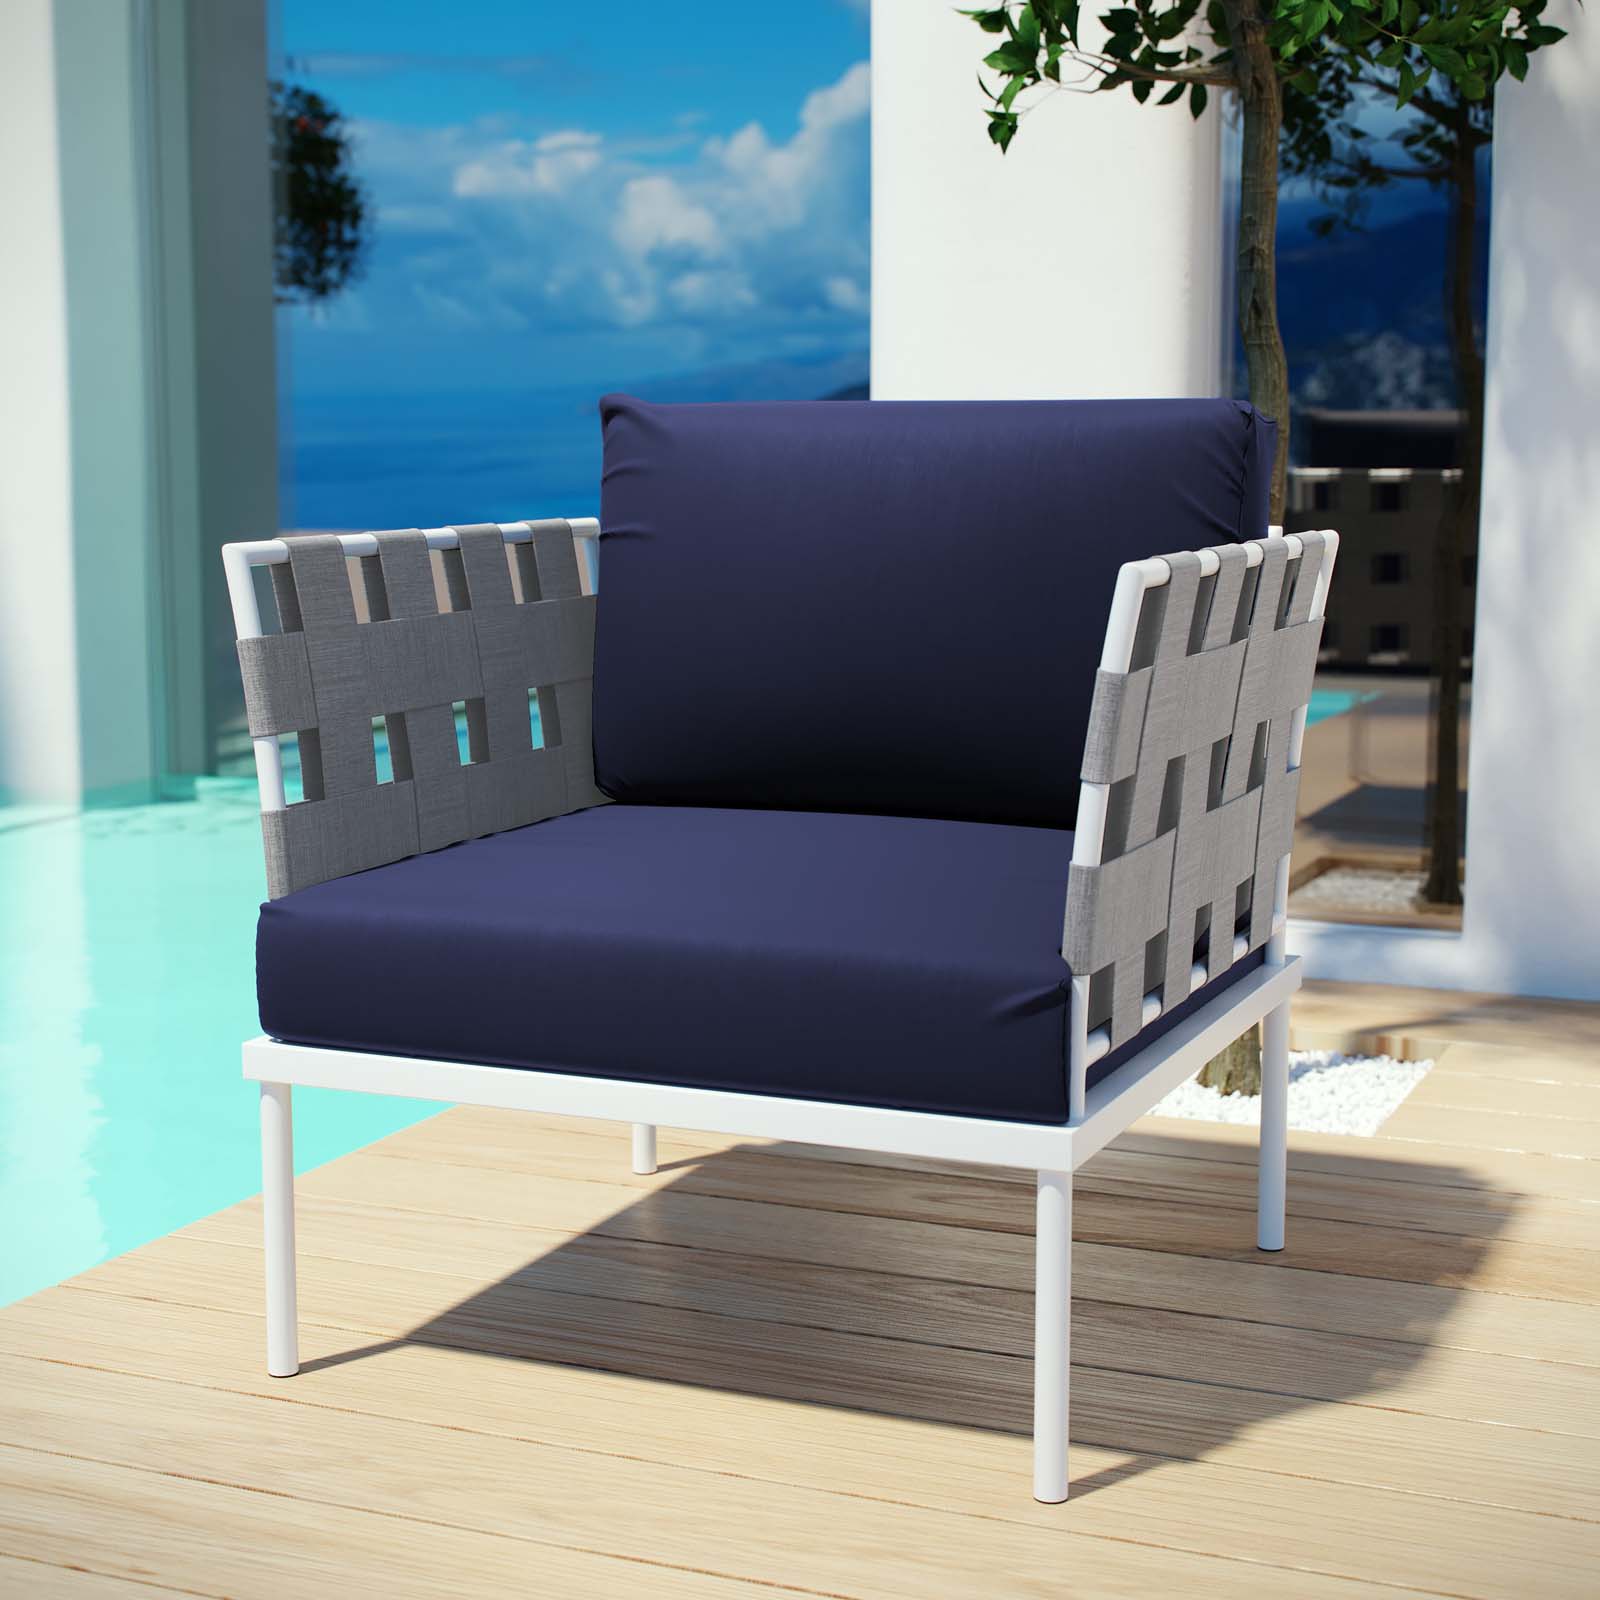 Modern Contemporary Urban Design Outdoor Patio Balcony Lounge Chair, Navy Blue White, Rattan - image 2 of 5